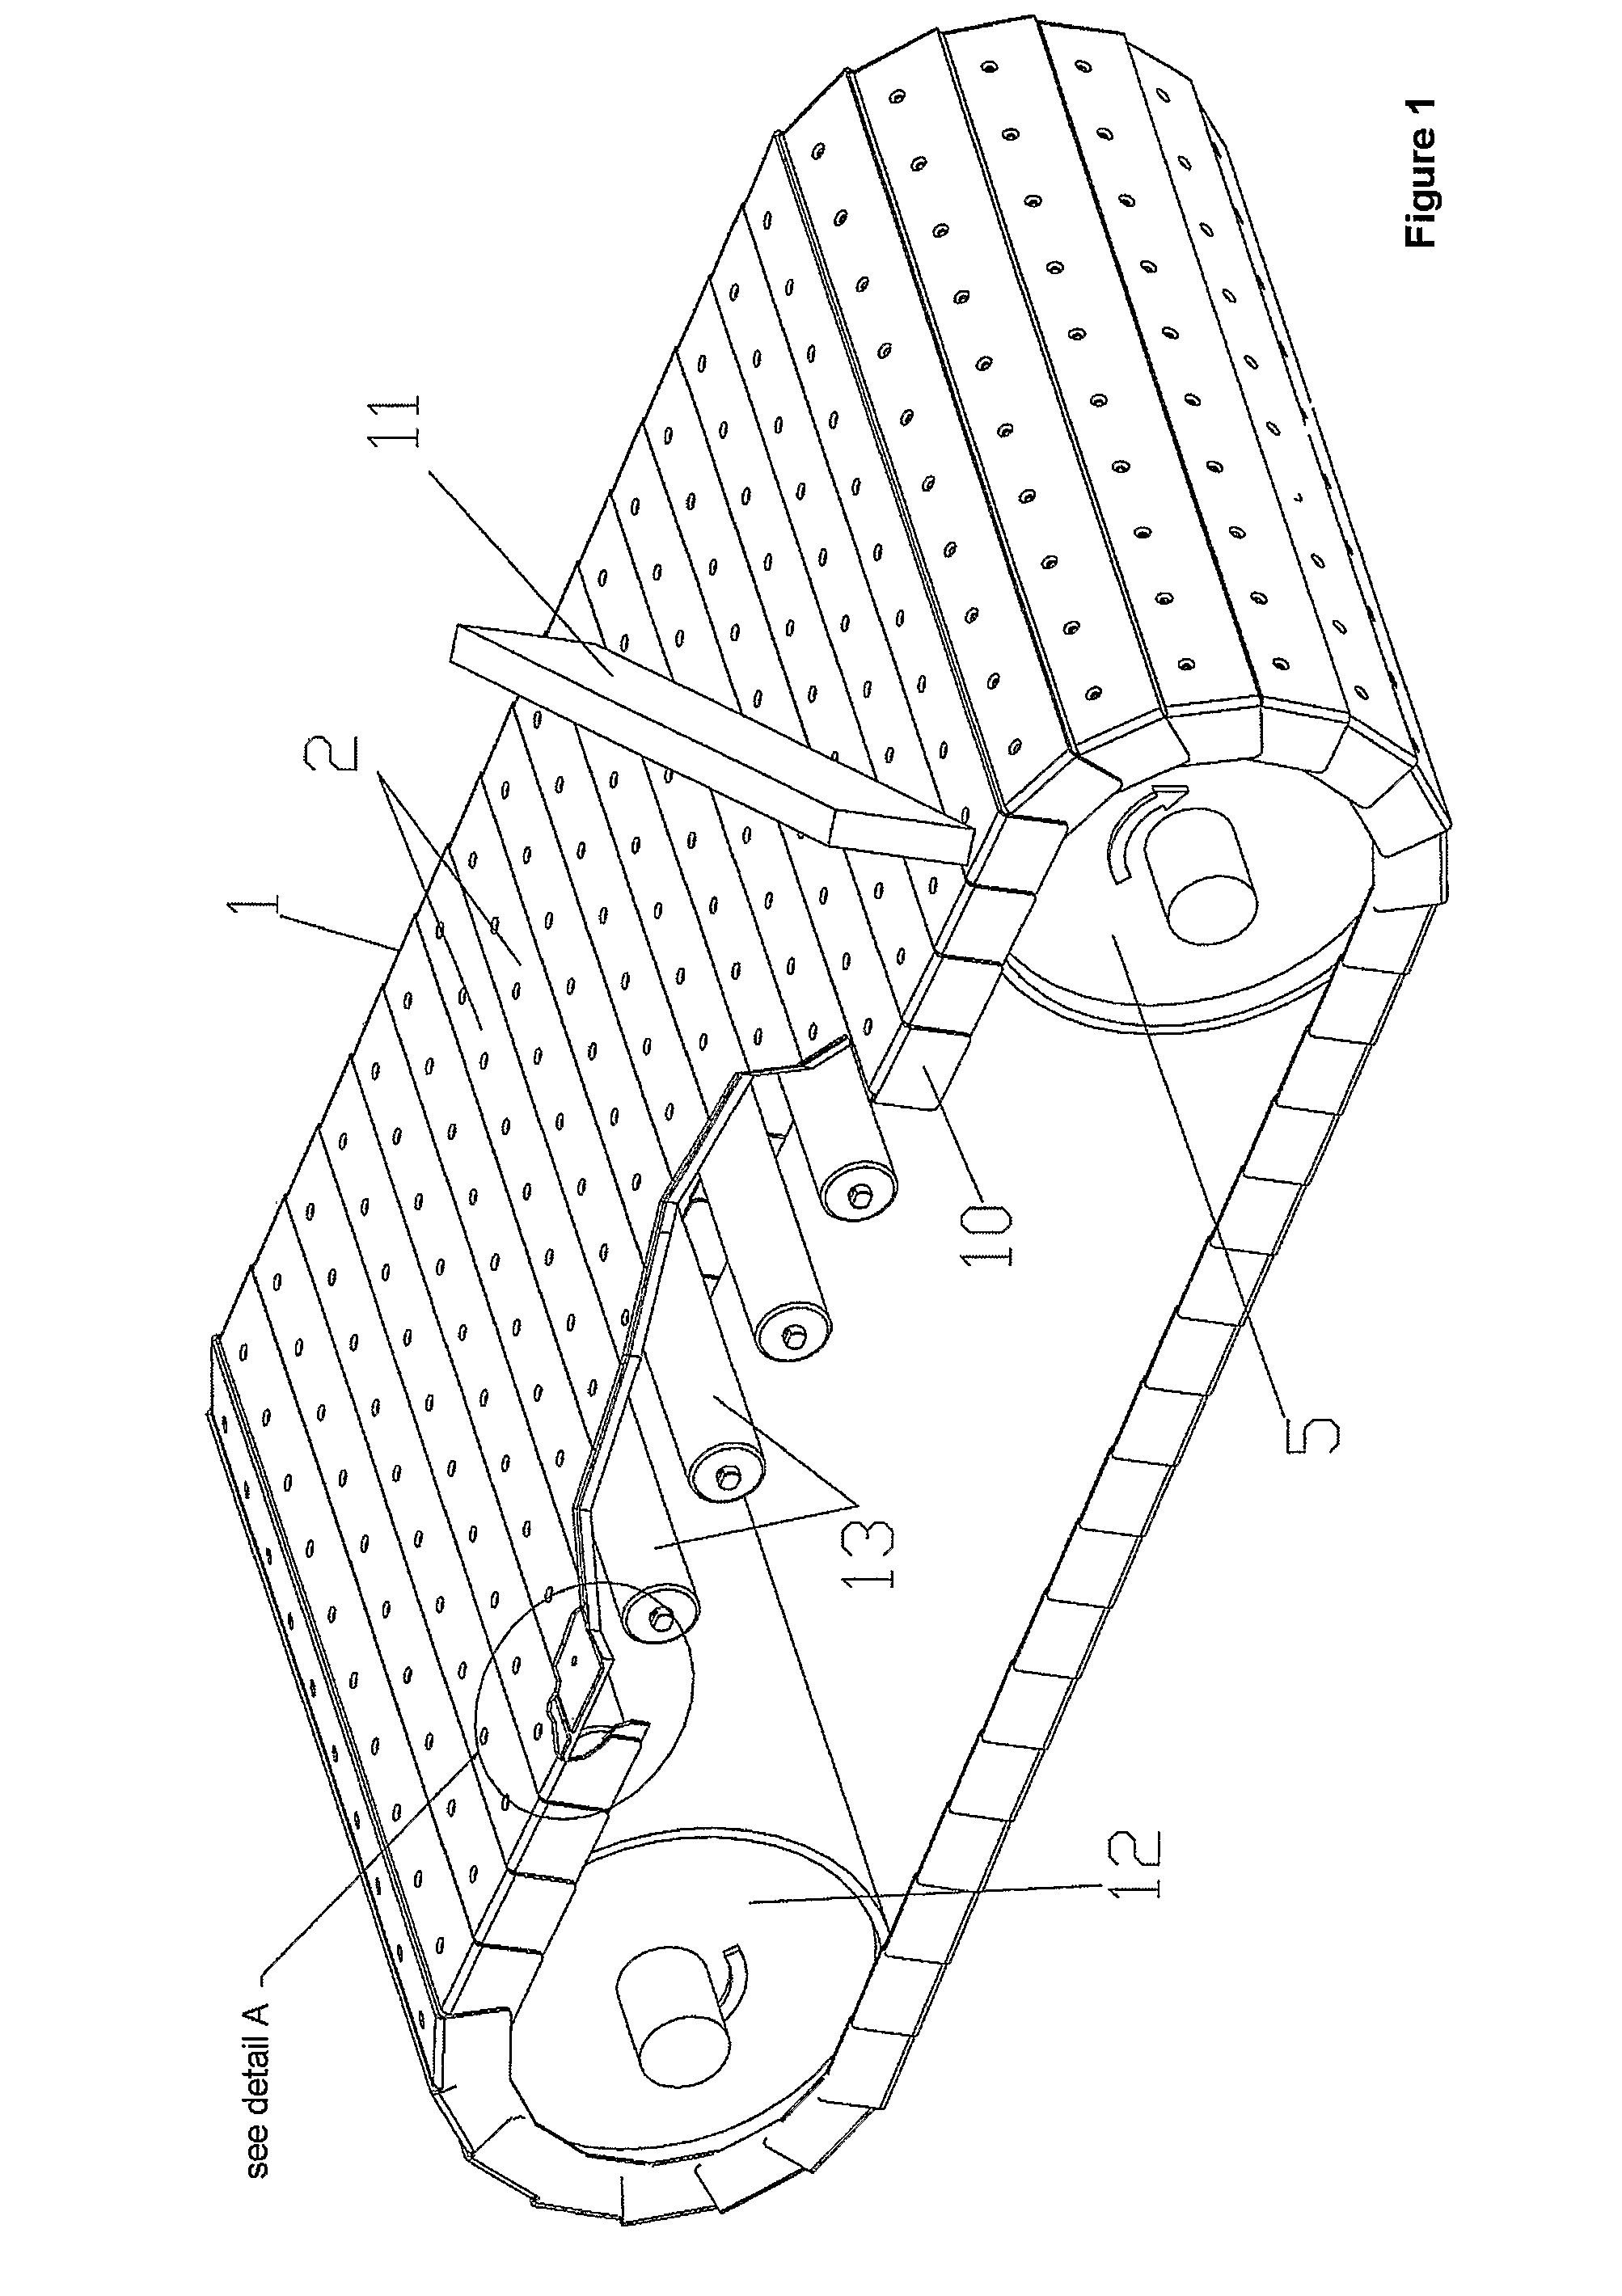 Conveyor belt with overlapping planar surface plates